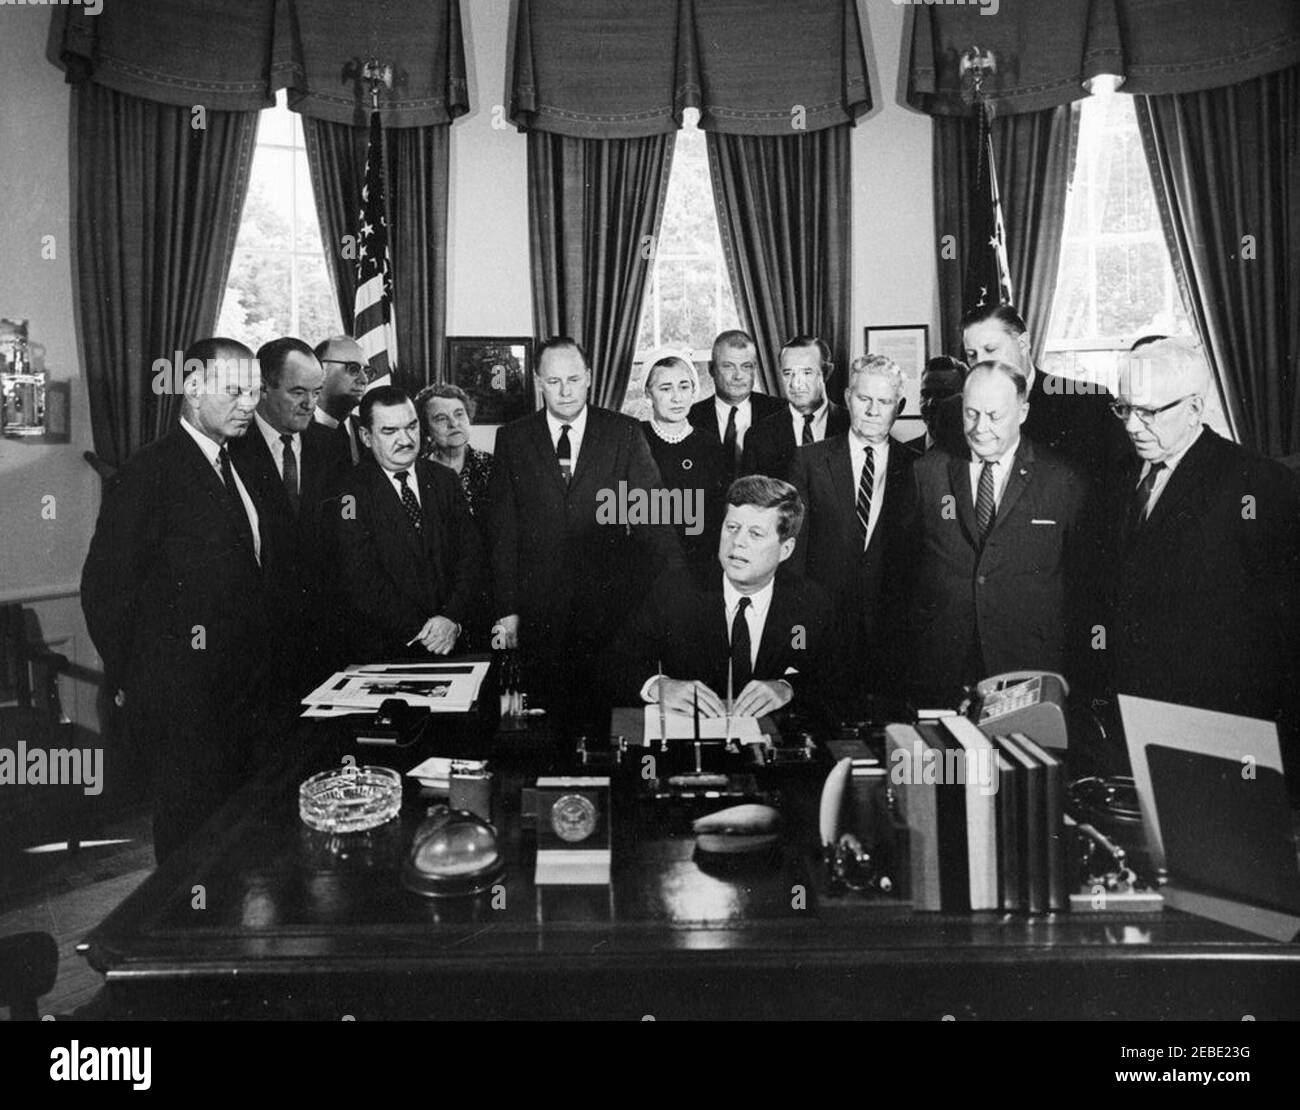 Bill signing - H.R. 8666 Public Law 87-256, Fulbright-Hays Act, 5:15PM. President John F. Kennedy signs the Mutual Educational and Cultural Exchange Act (Fulbright-Hays Act) in the Oval Office, White House, Washington, D.C. (L-R) Senator J. William Fulbright of Arkansas; Senator Hubert Humphrey of Minnesota; Representative E. Ross Adair of Indiana; Representative Clement Zablocki of Wisconsin; Representative Frances Bolton of Ohio; Representative Wayne Hays of Ohio; Representative Edna Kelly of New York; Representative Horace Seely-Brown of Connecticut; Representative John Monagan of Connectic Stock Photo